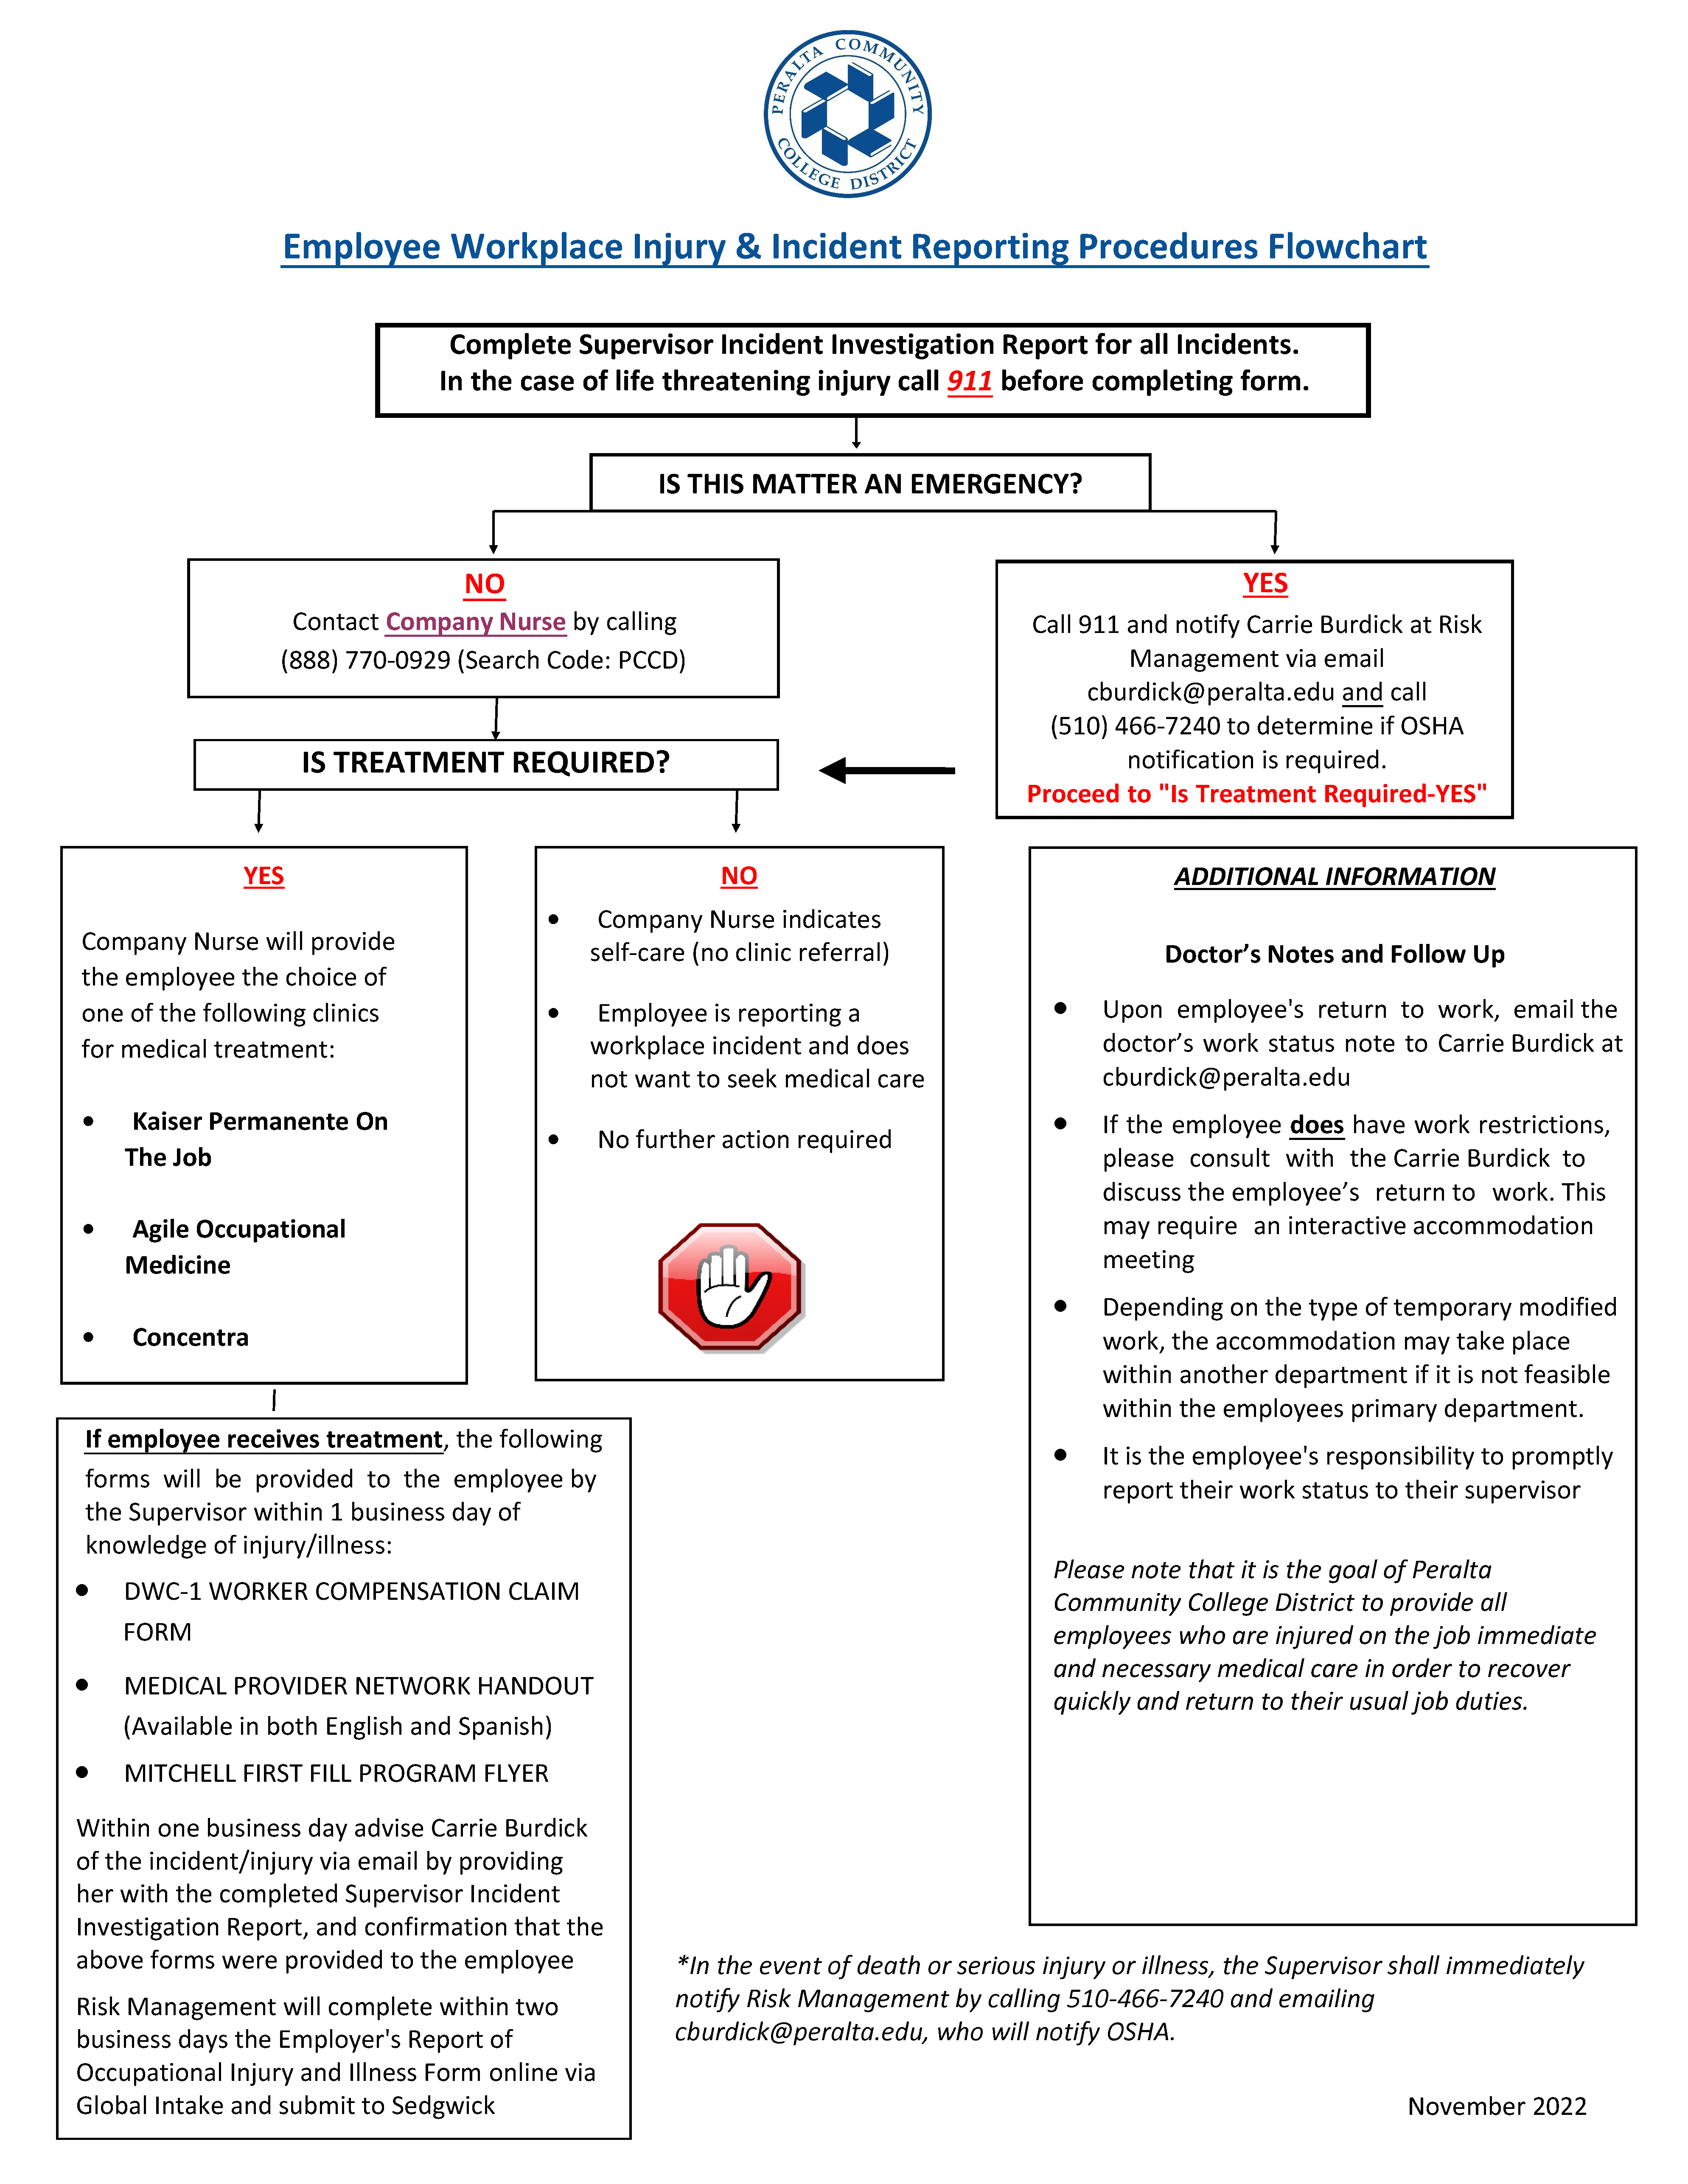 Peralta CCD Workplace Injury Incident Reporting Procedures Flowchart 013123